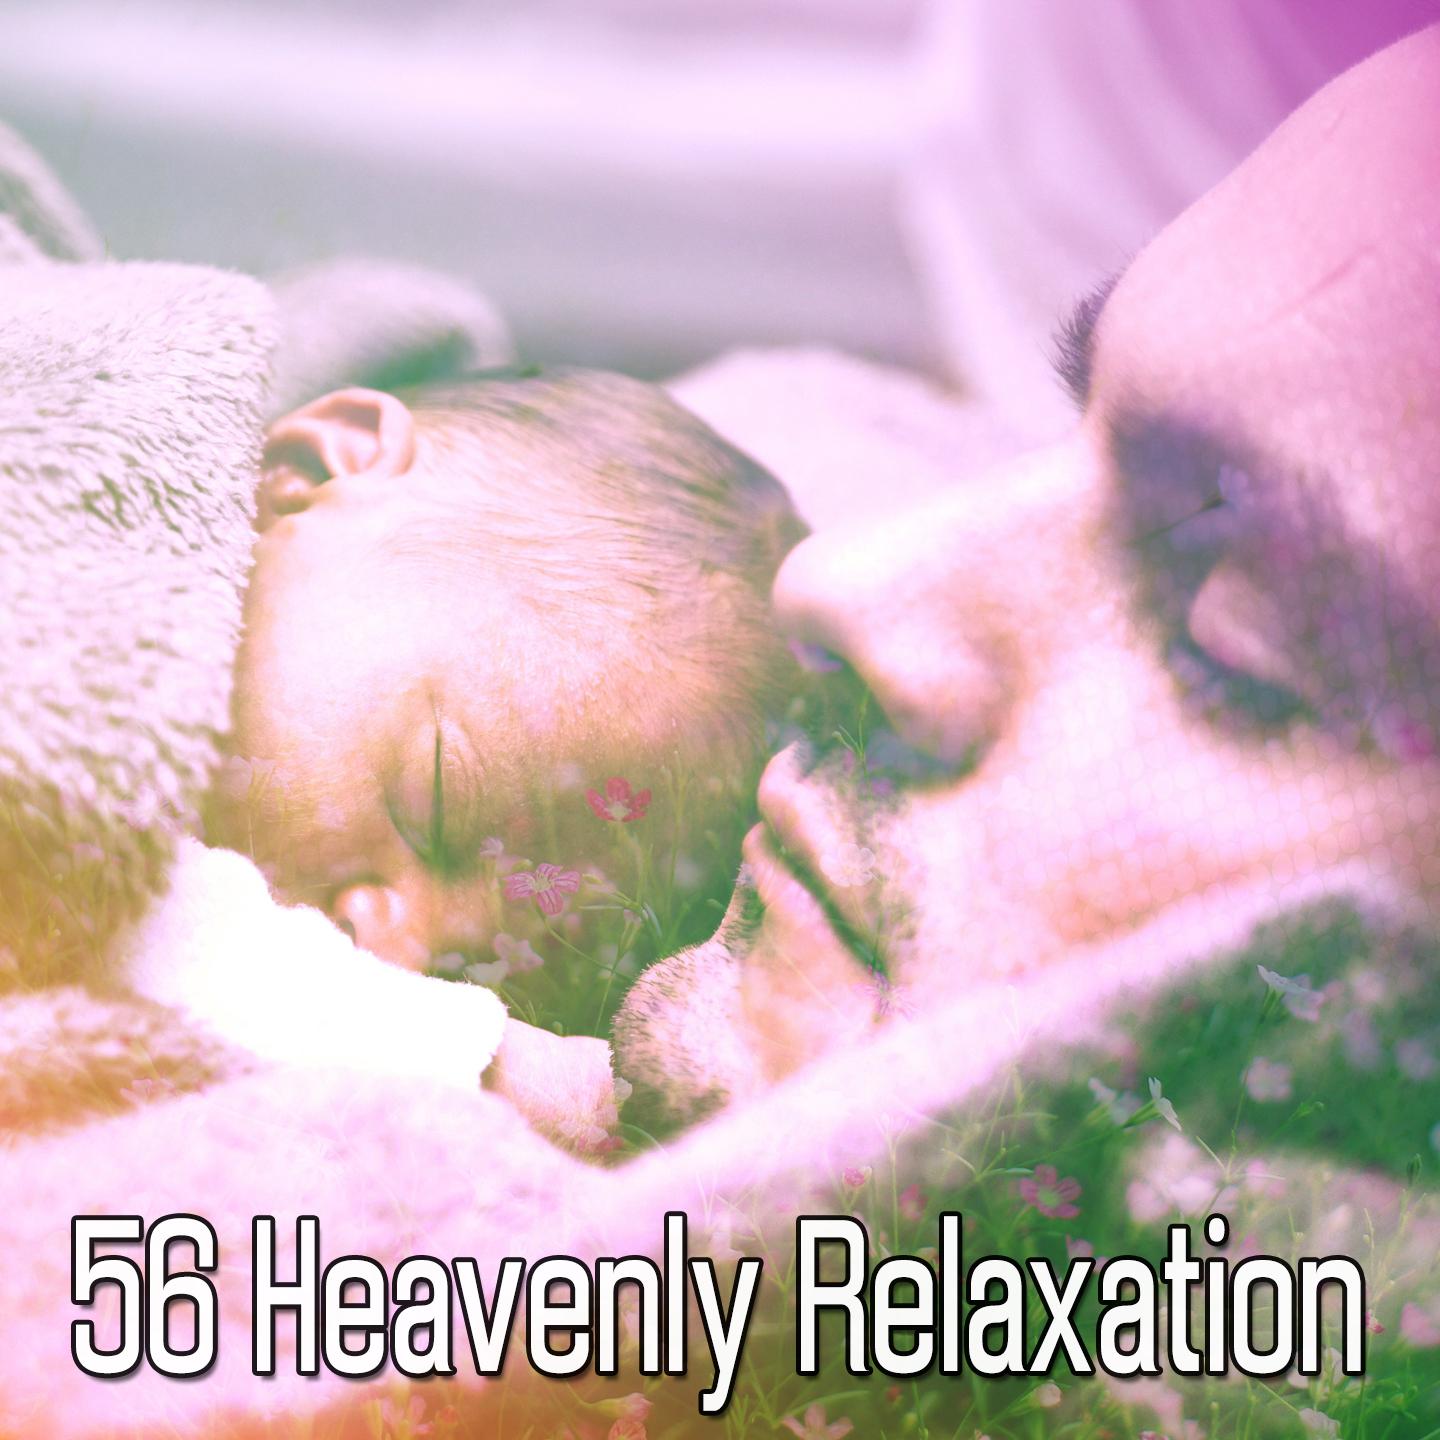 56 Heavenly Relaxation